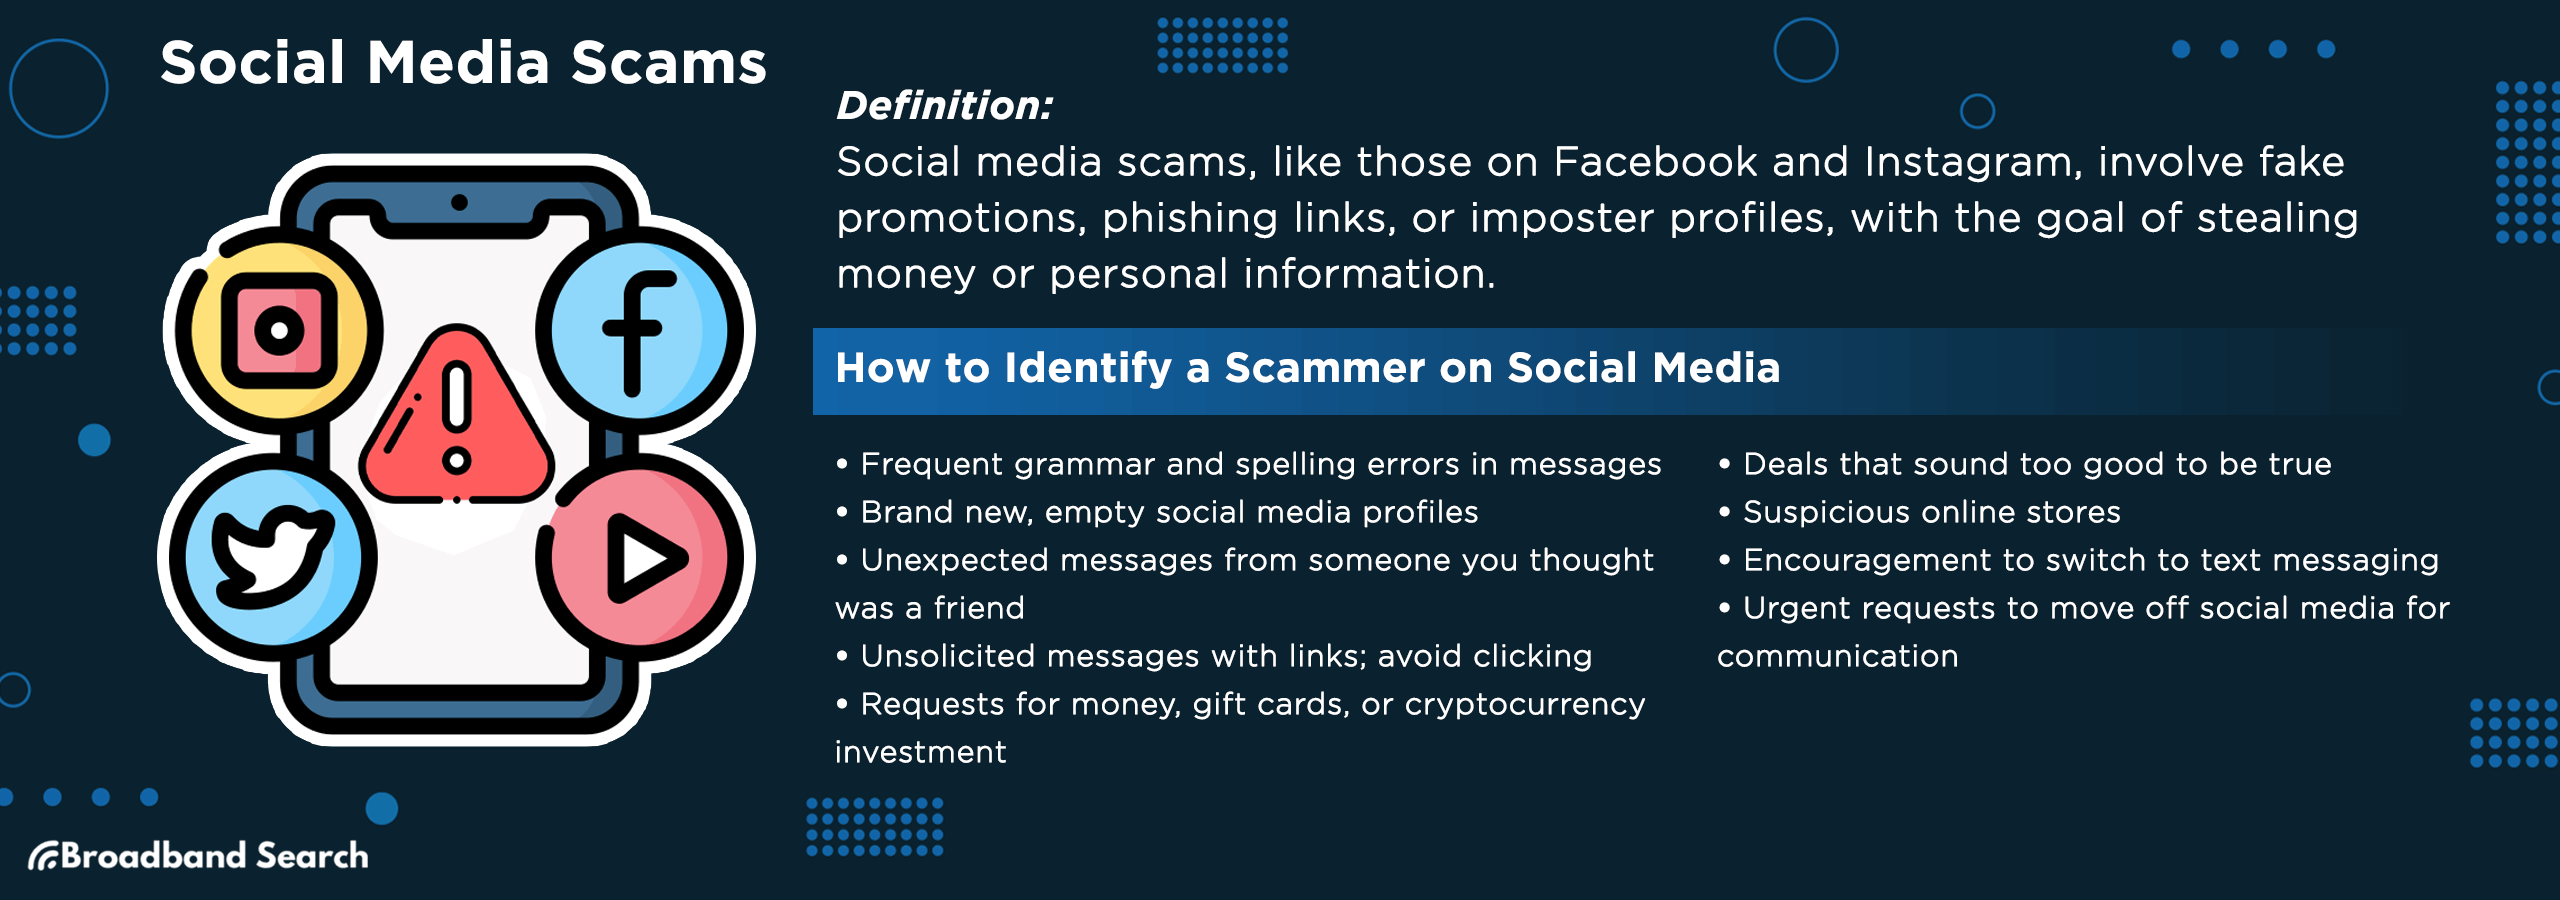 Definition and signs of social media scams